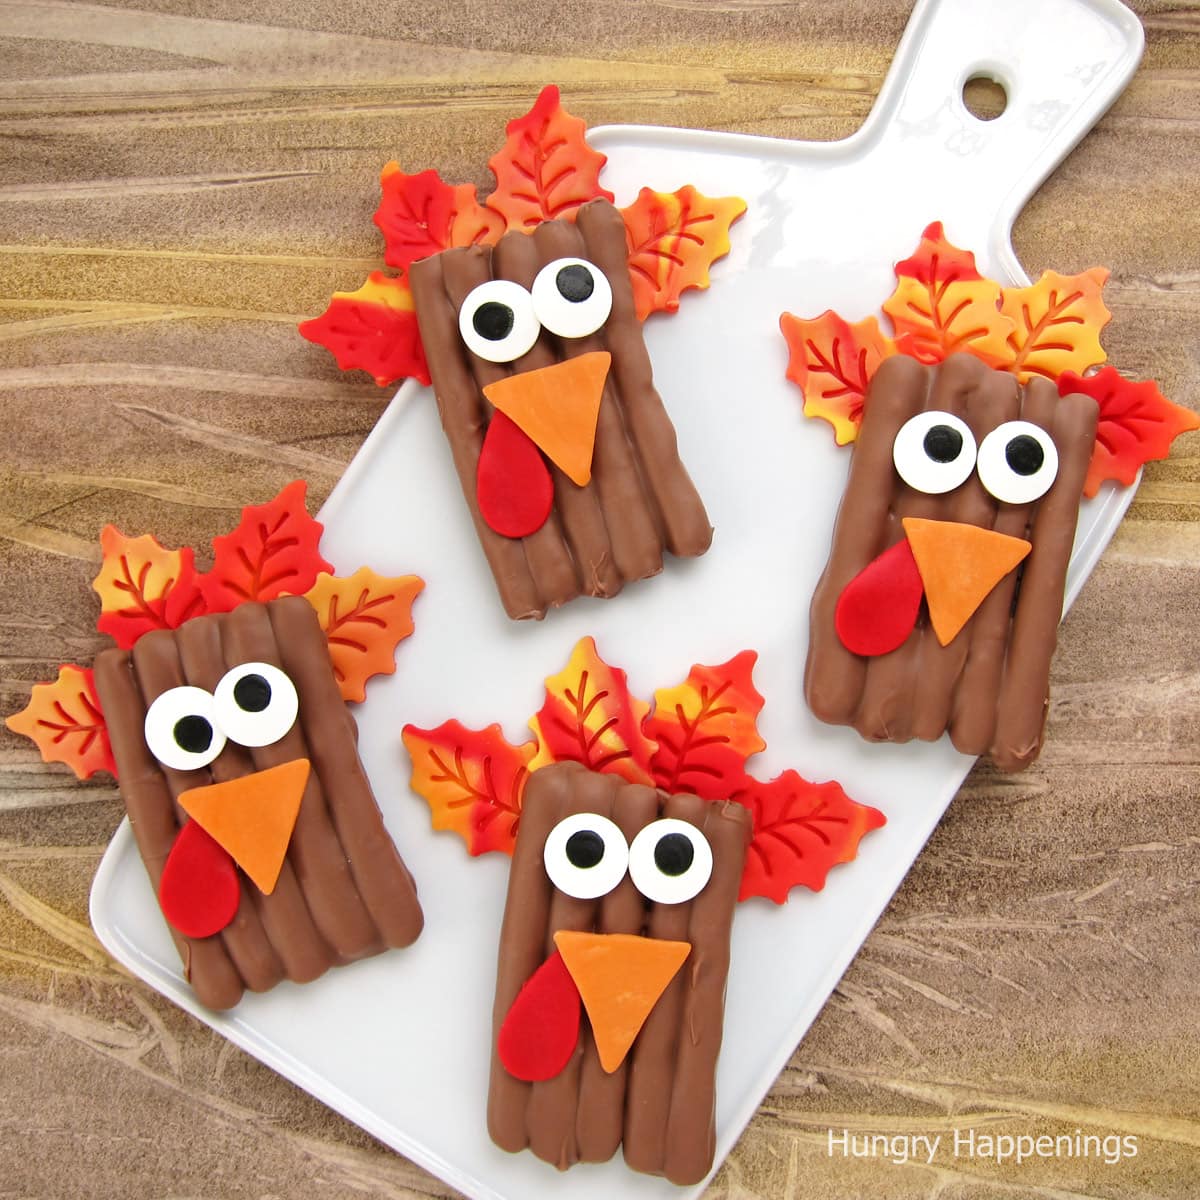 Chocolate-dipped turkey pretzels with colorful modeling chocolate features.